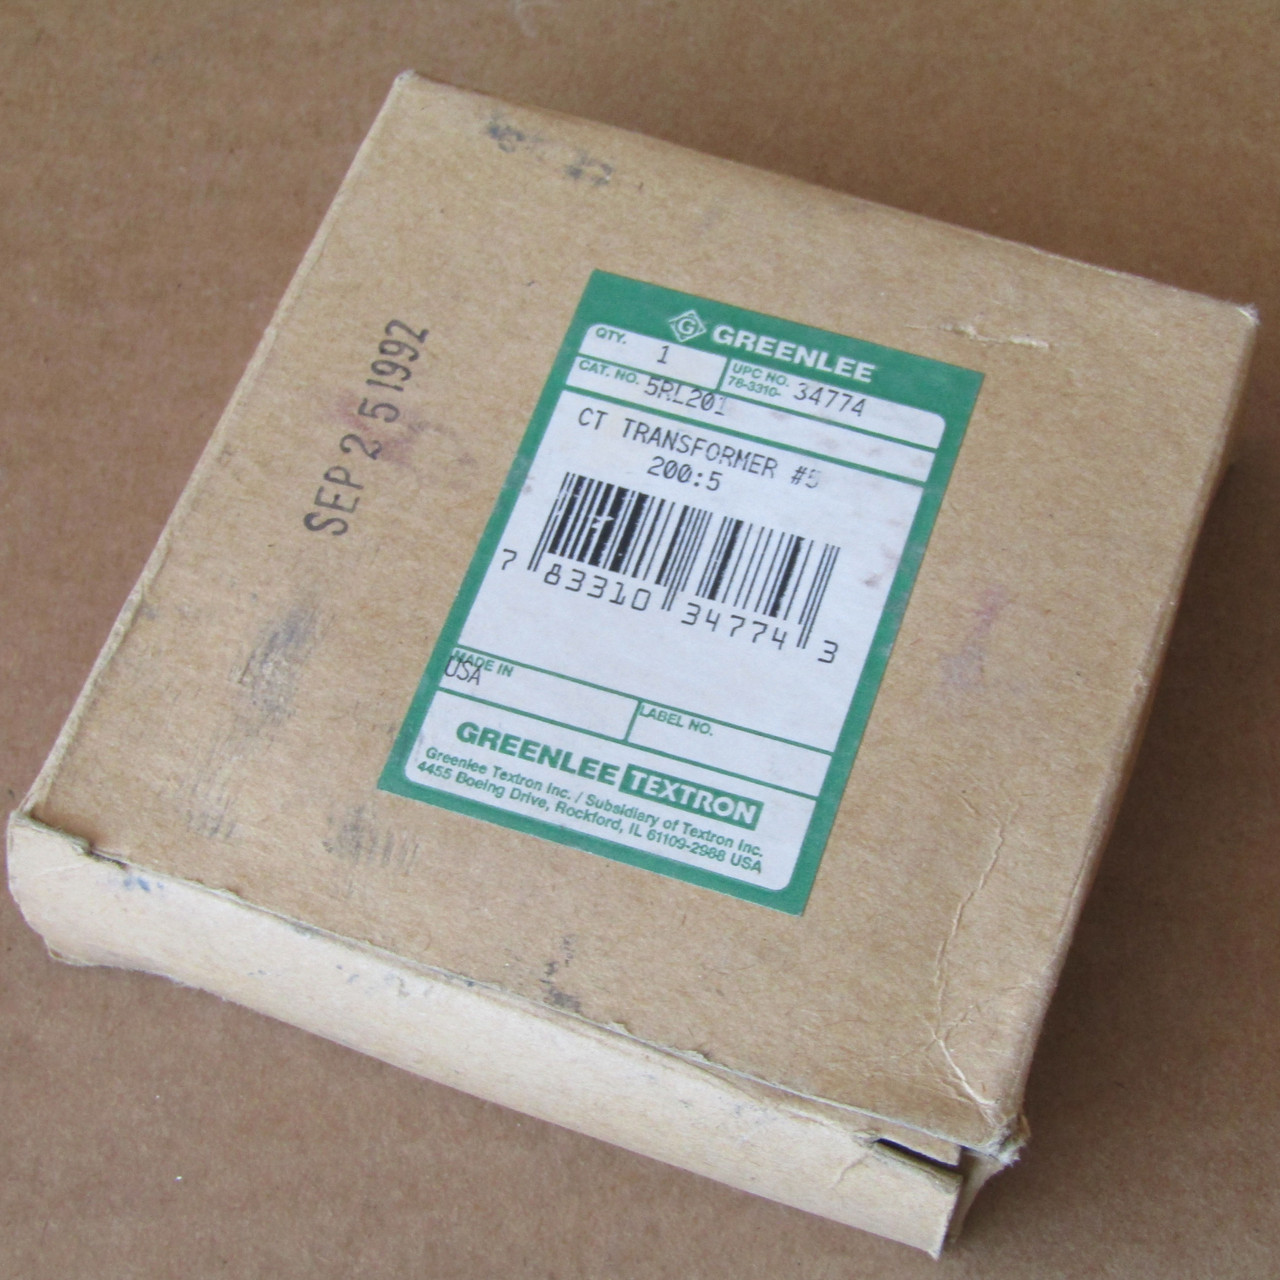 Greenlee 5RL201  Current Transformer #5 200:5 - New In Box